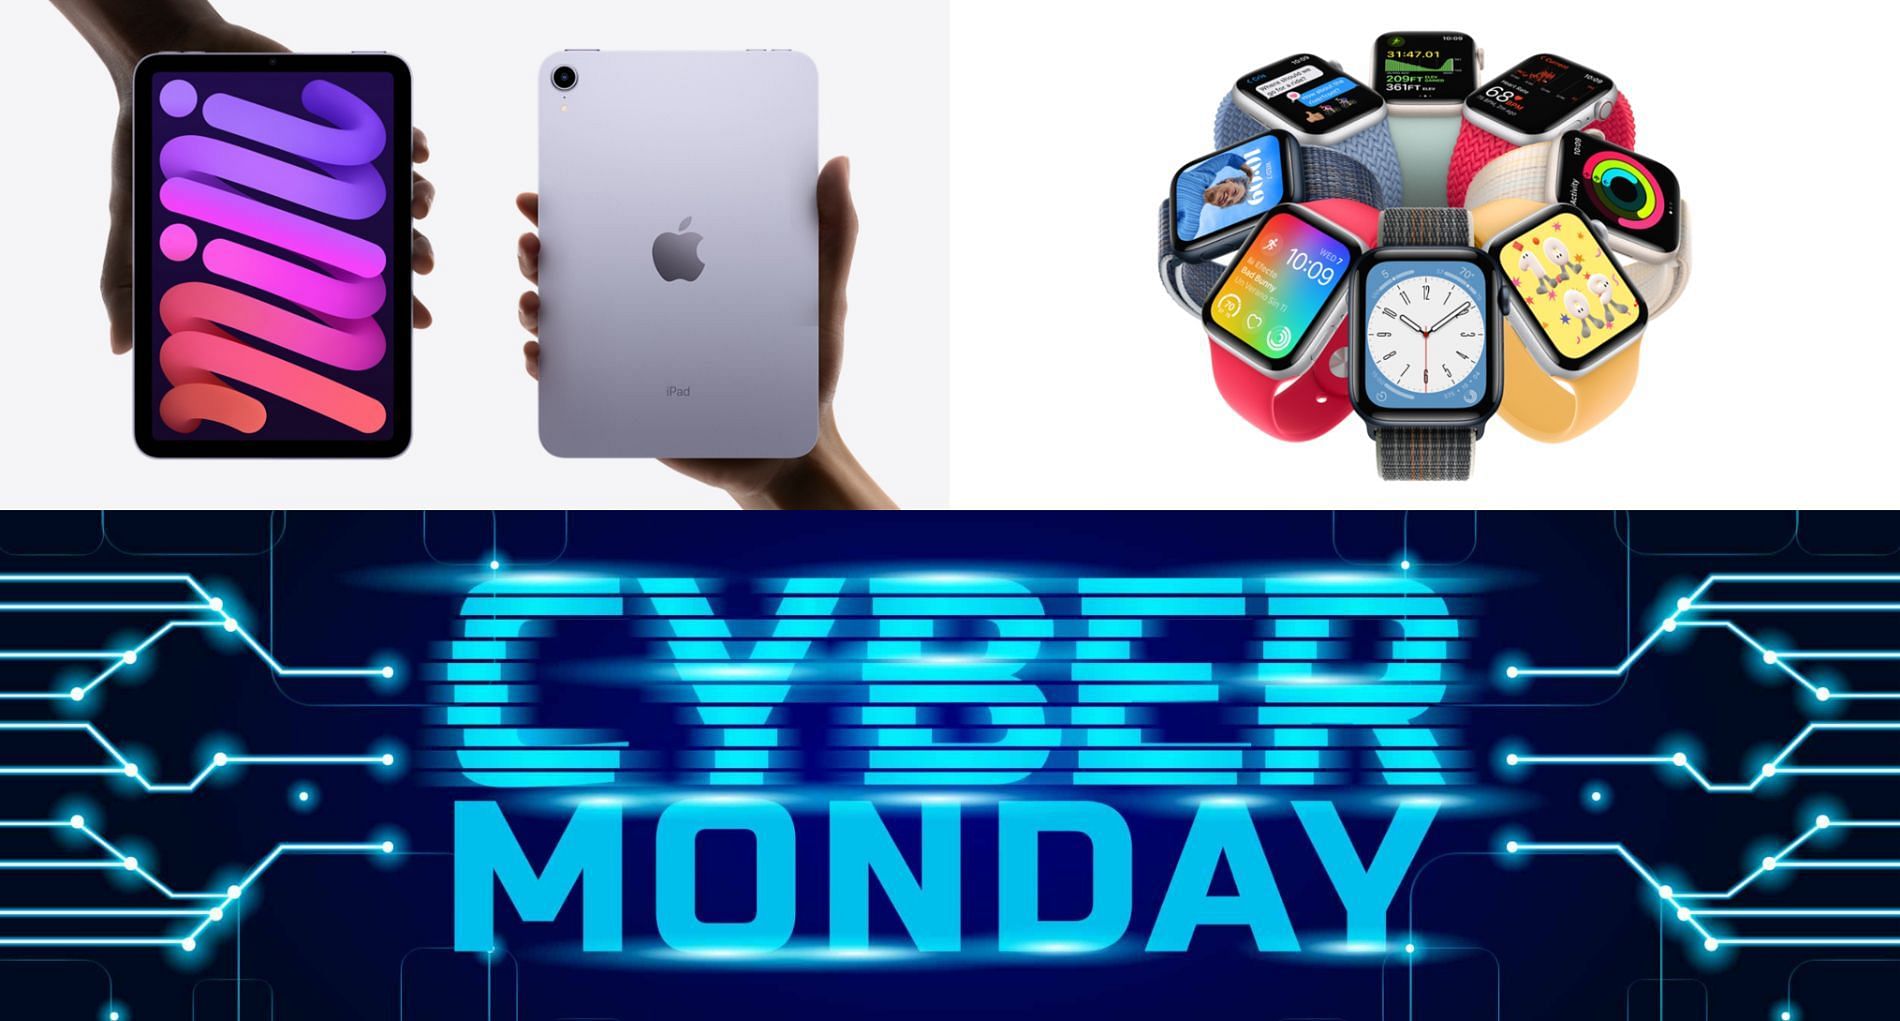 Cyber Monday deals on Apple devices (image by Apple)